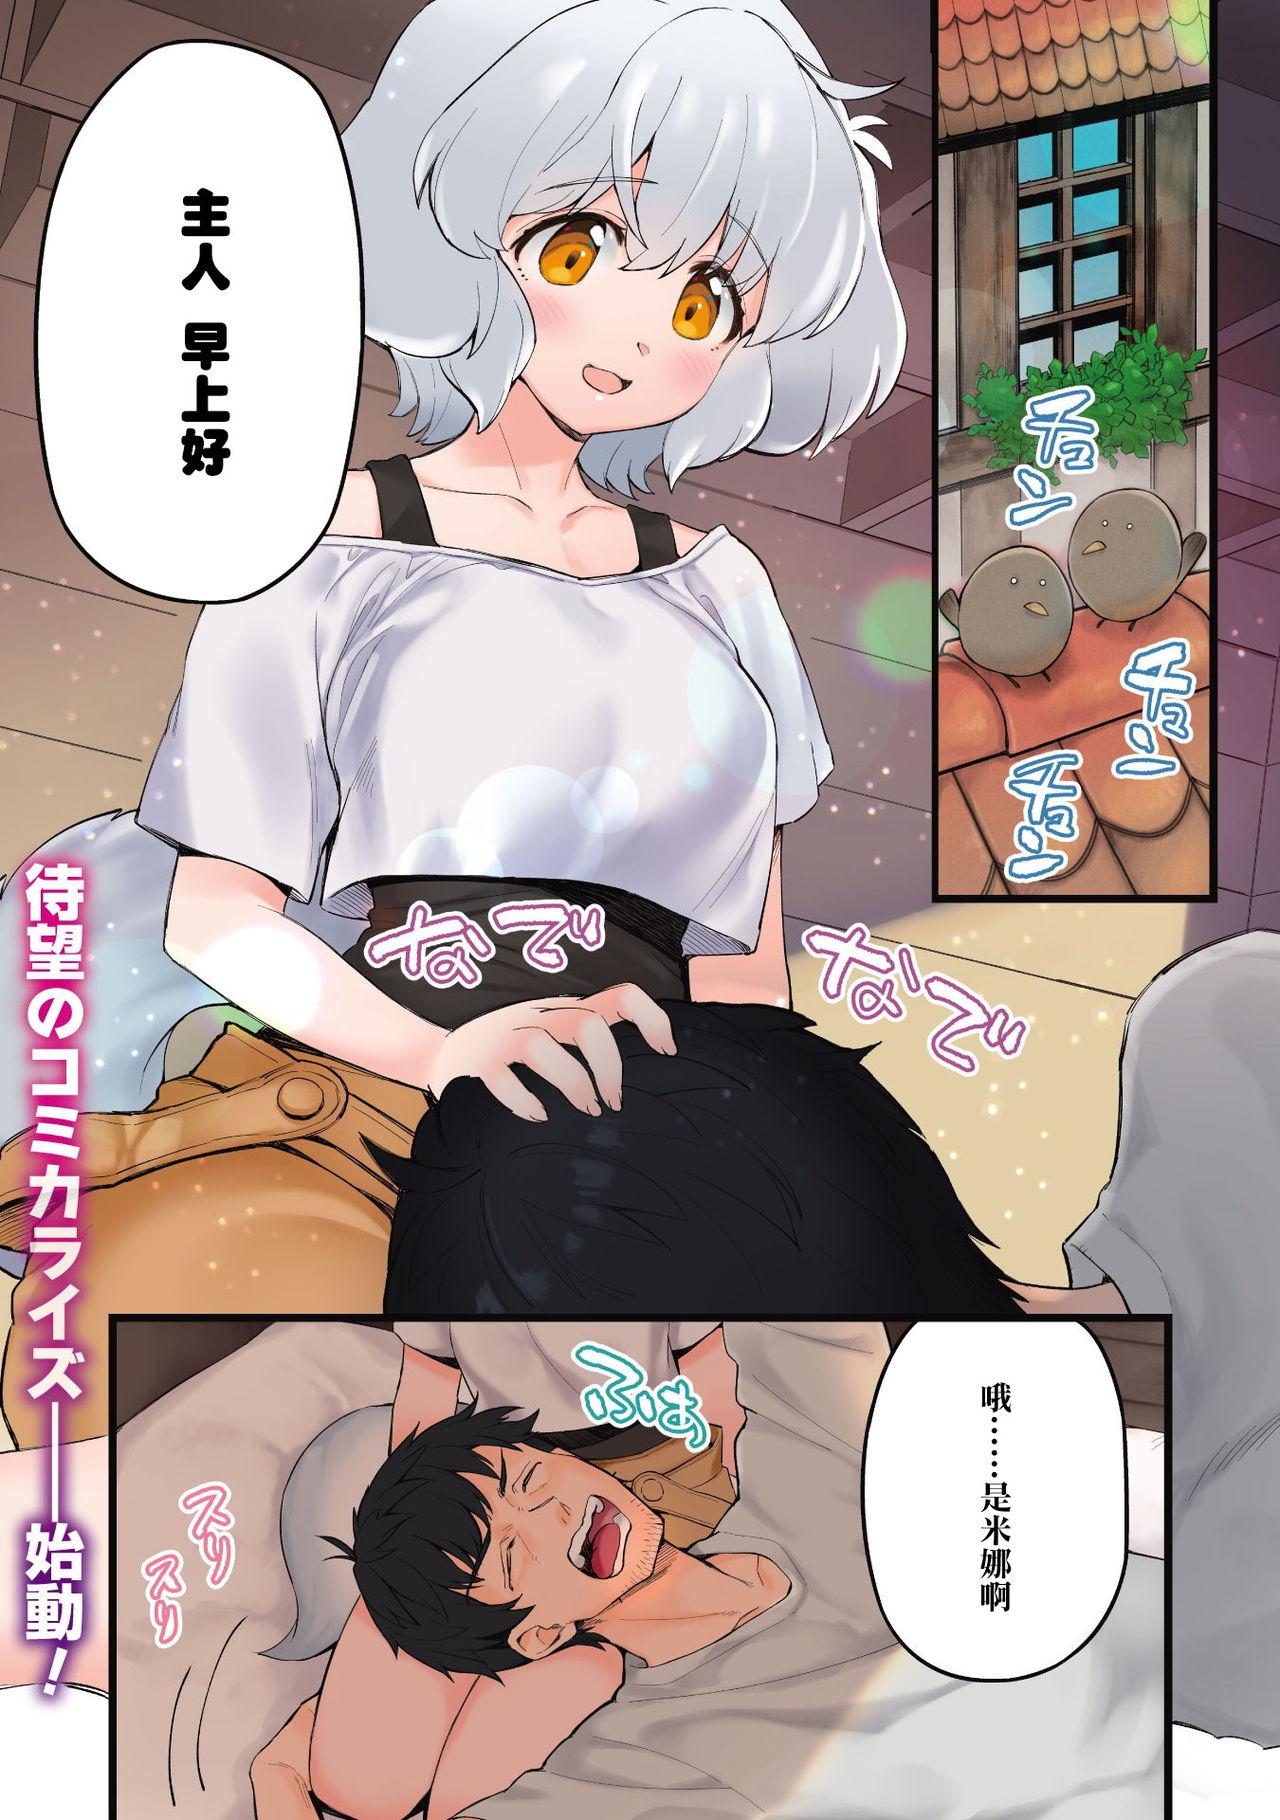 Candid Eroi Skill de Isekai Musou Ch. 1 Tanned - Page 4